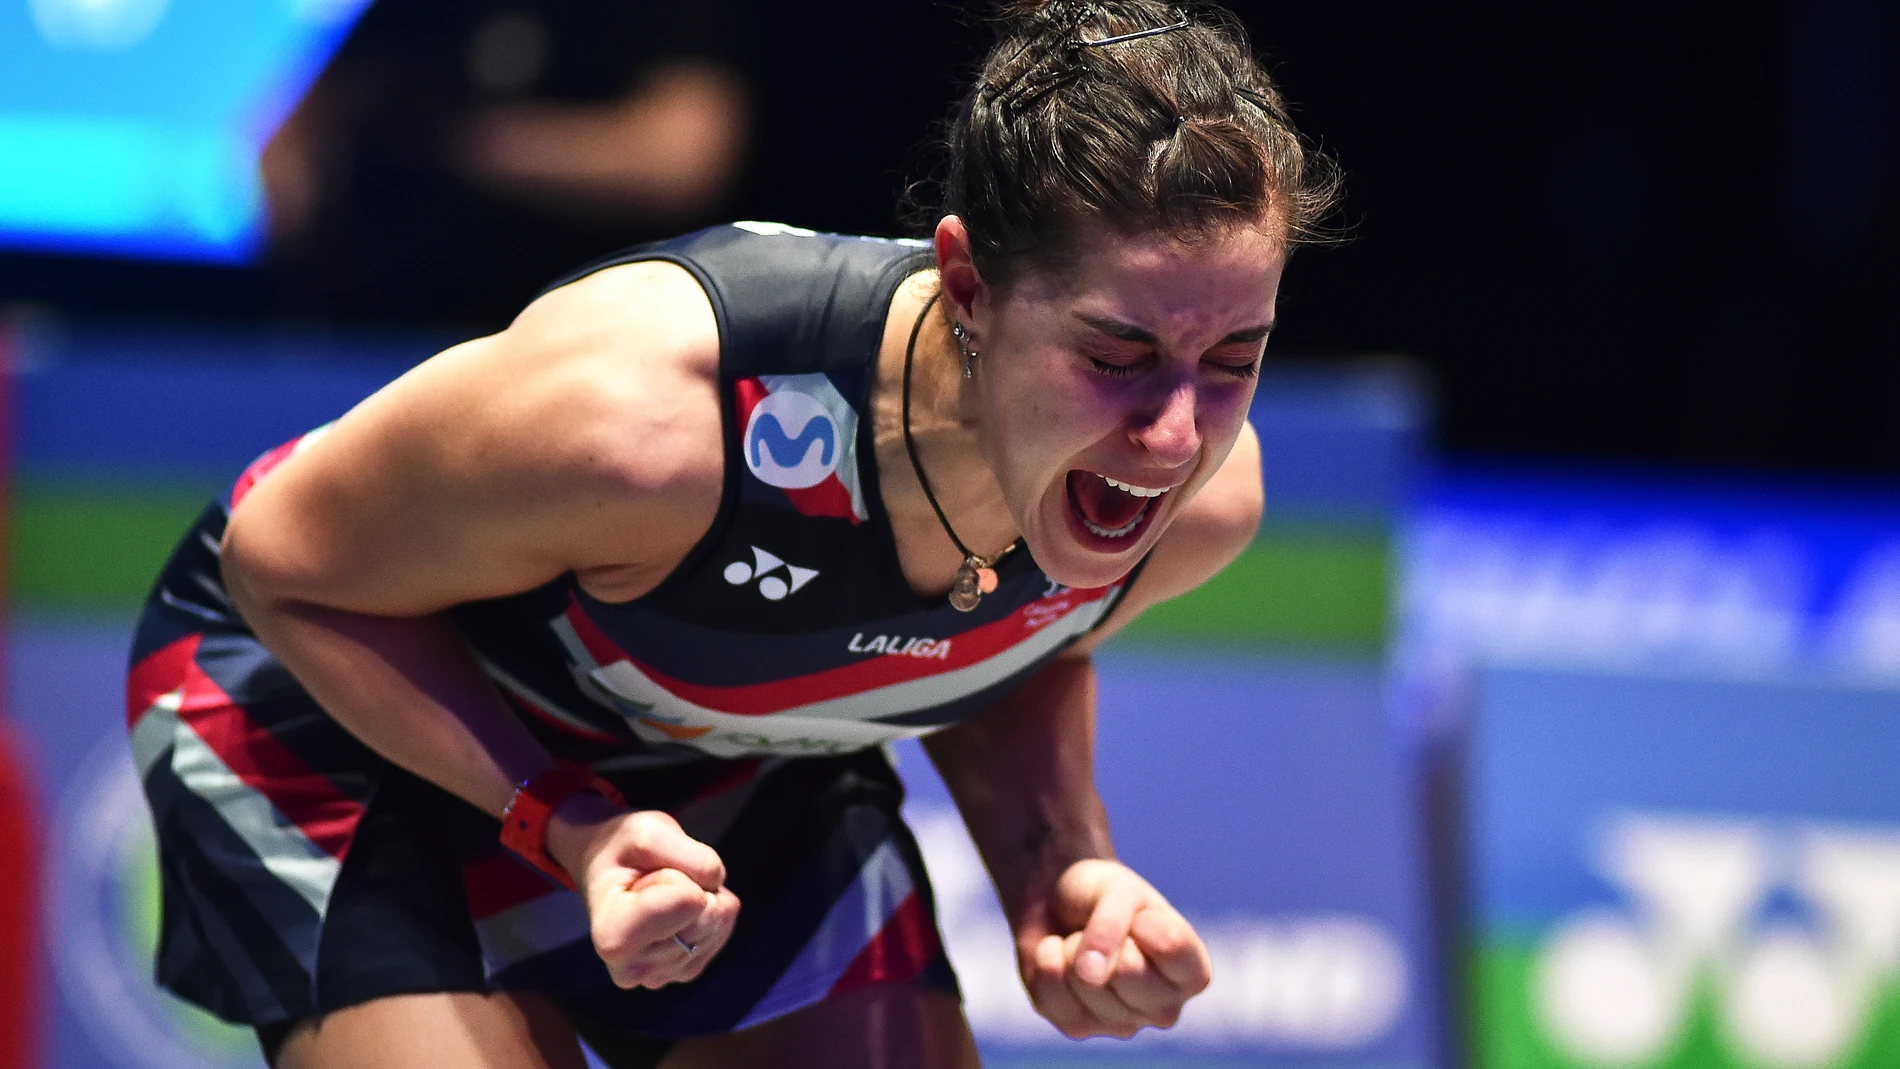 Spain's Carolina Marin reacts after winning the final women's single match of the All England Open Badminton Championships against Japan's Akane Yamaguchi at the Utilita Arena in Birmingham, England, Sunday, March 17, 2024. (AP Photo/Rui Vieira)